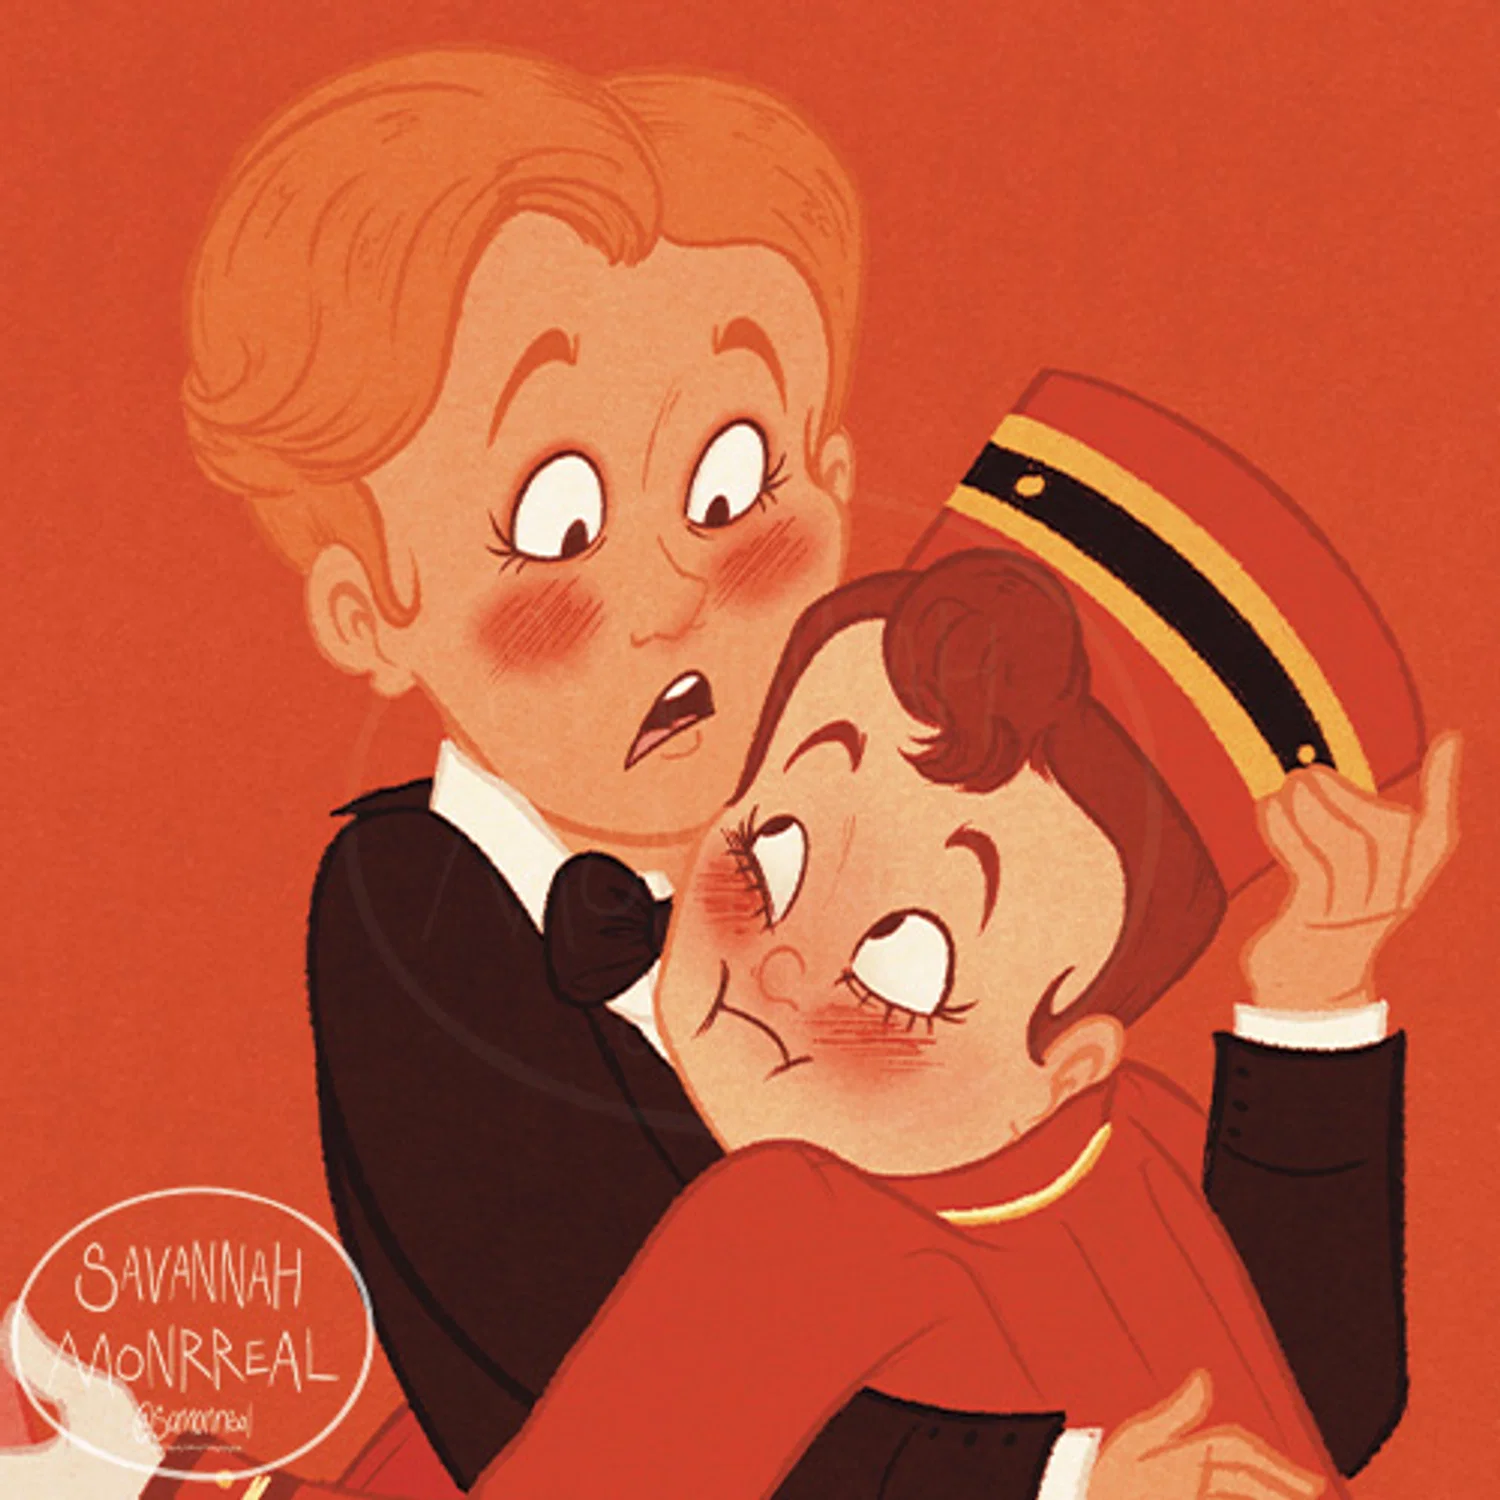 Bellhop is in the arms of the orange-blonde haired gentleman in the black tuxedo. The bellhop is still clutching the pink suitcase, the gentleman is holding onto him to keep him upright, his right hand is on the bellhop's back and his left hand is on the bellhops' head. Both their cheeks are prominently red, the bellhop's face is squished against the gentleman. The other has a face of surprise. There is a watermark in the corner that says "Savannah Monrreal @samonrreal"  